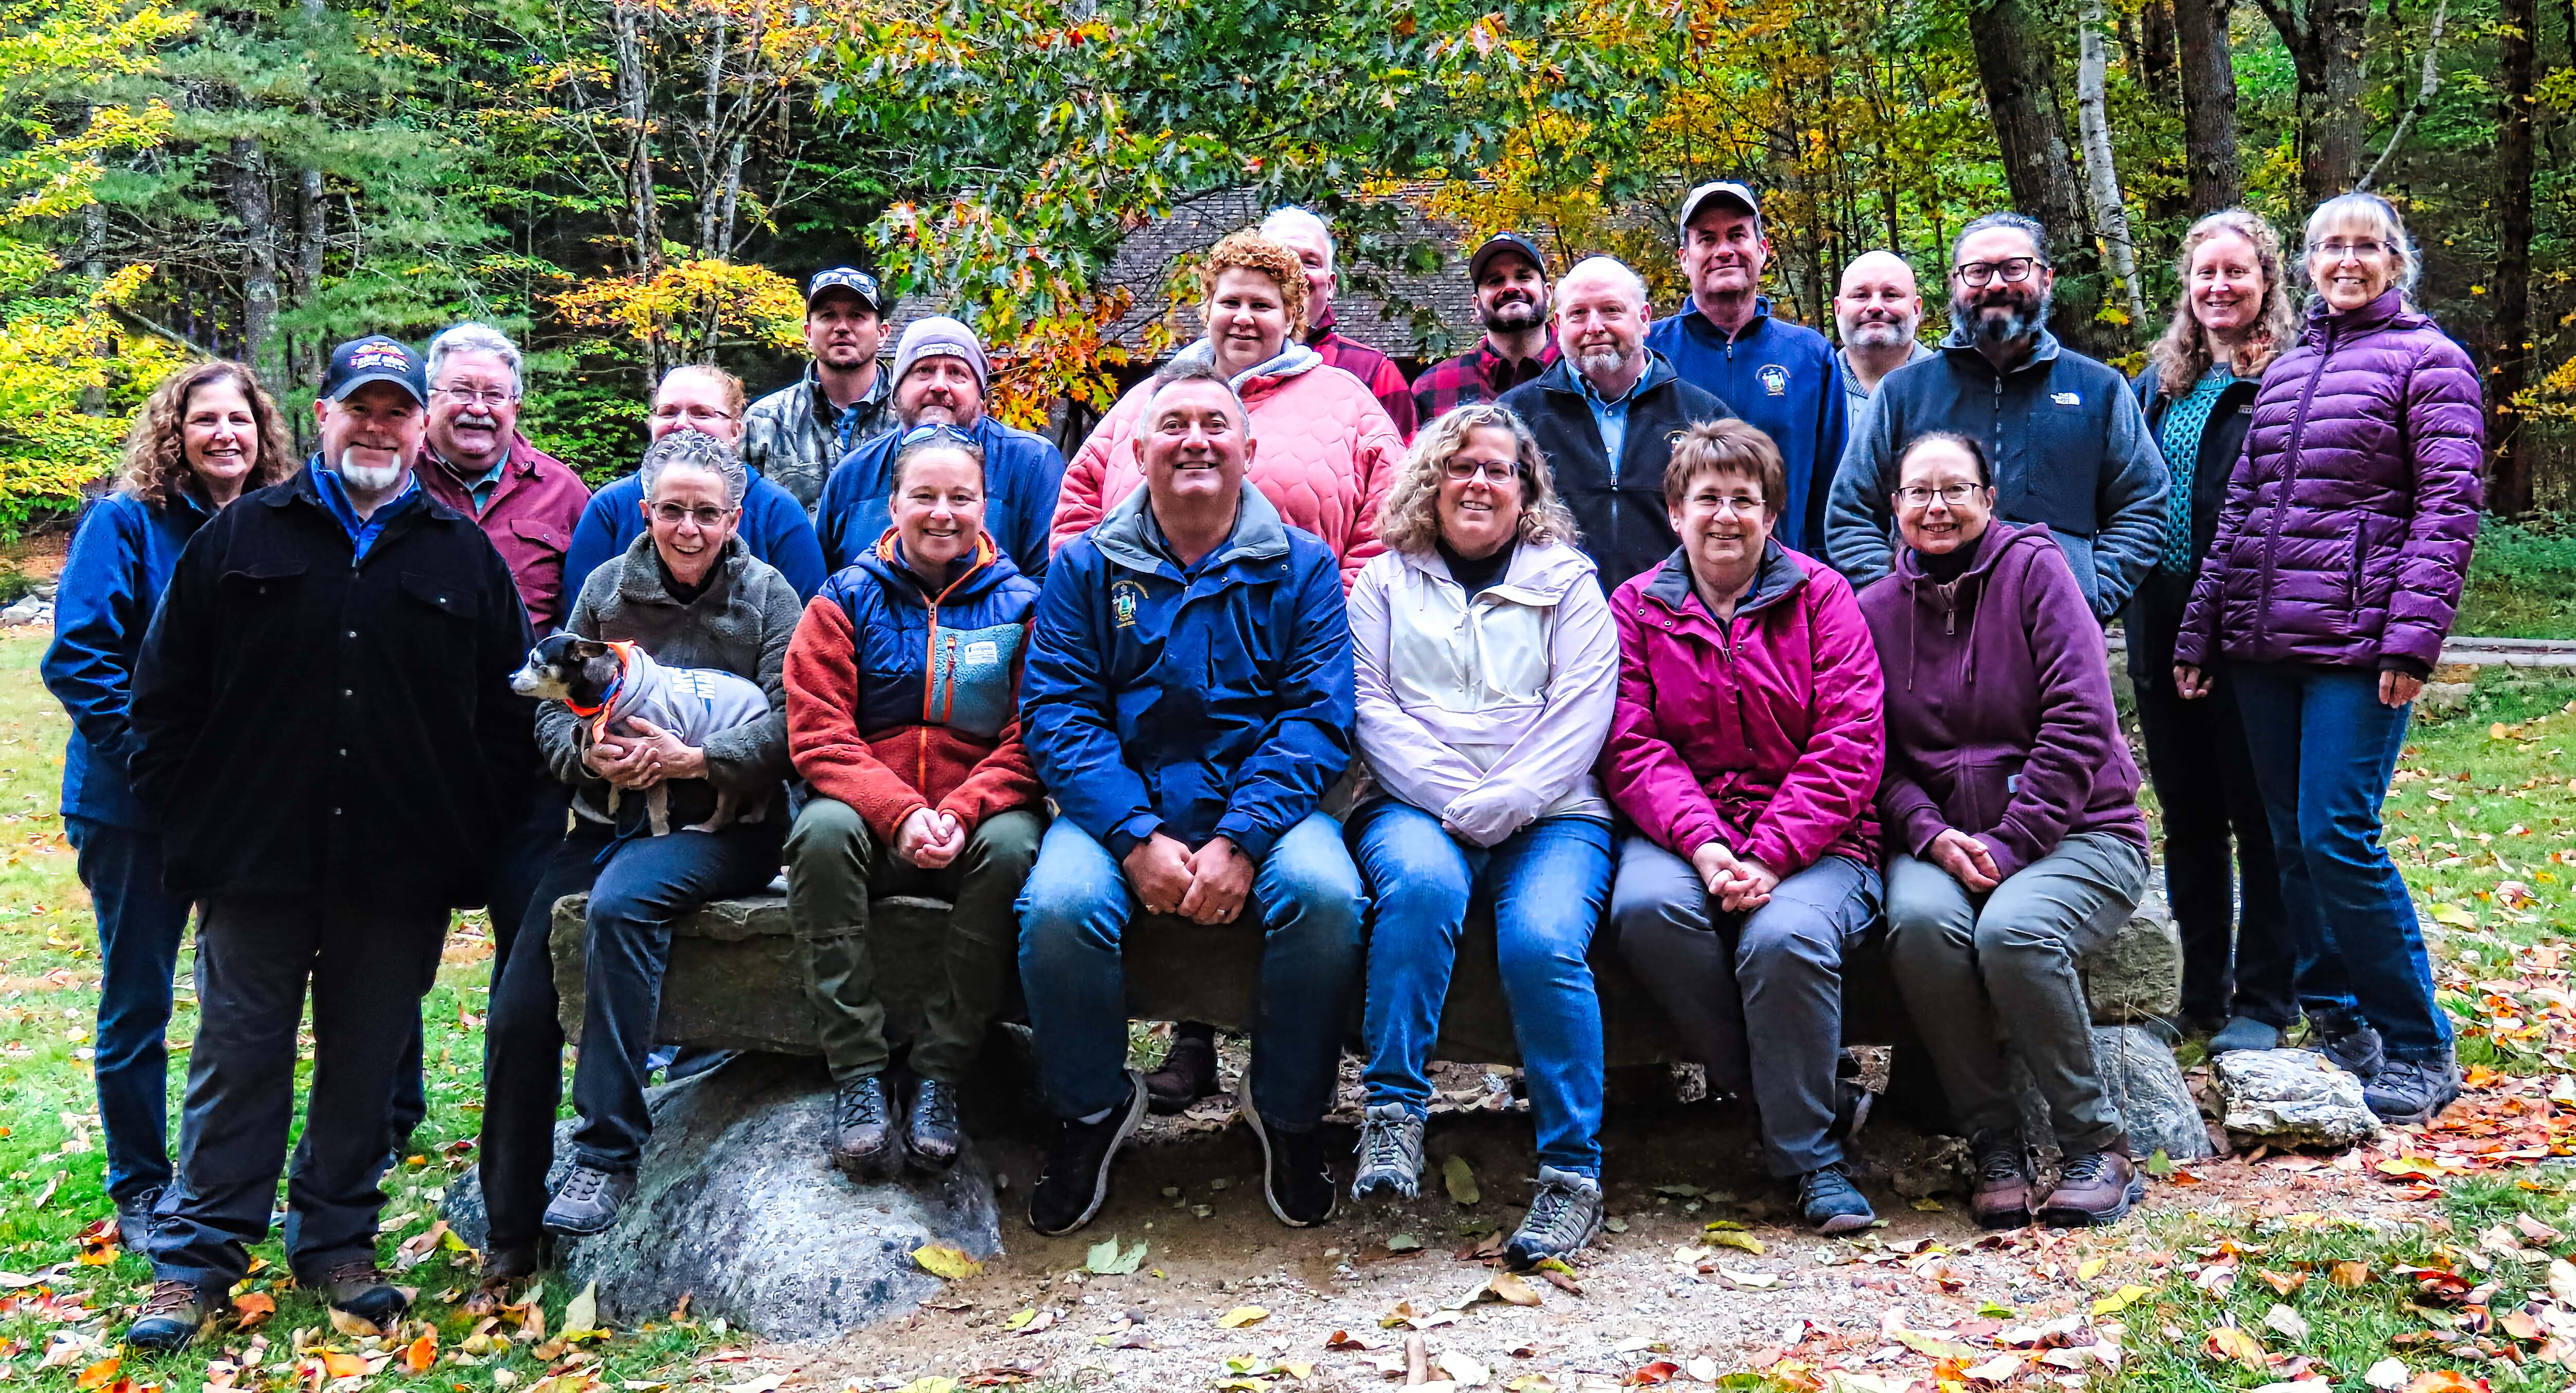 The staff of the Health Inspection Program posing in the woods